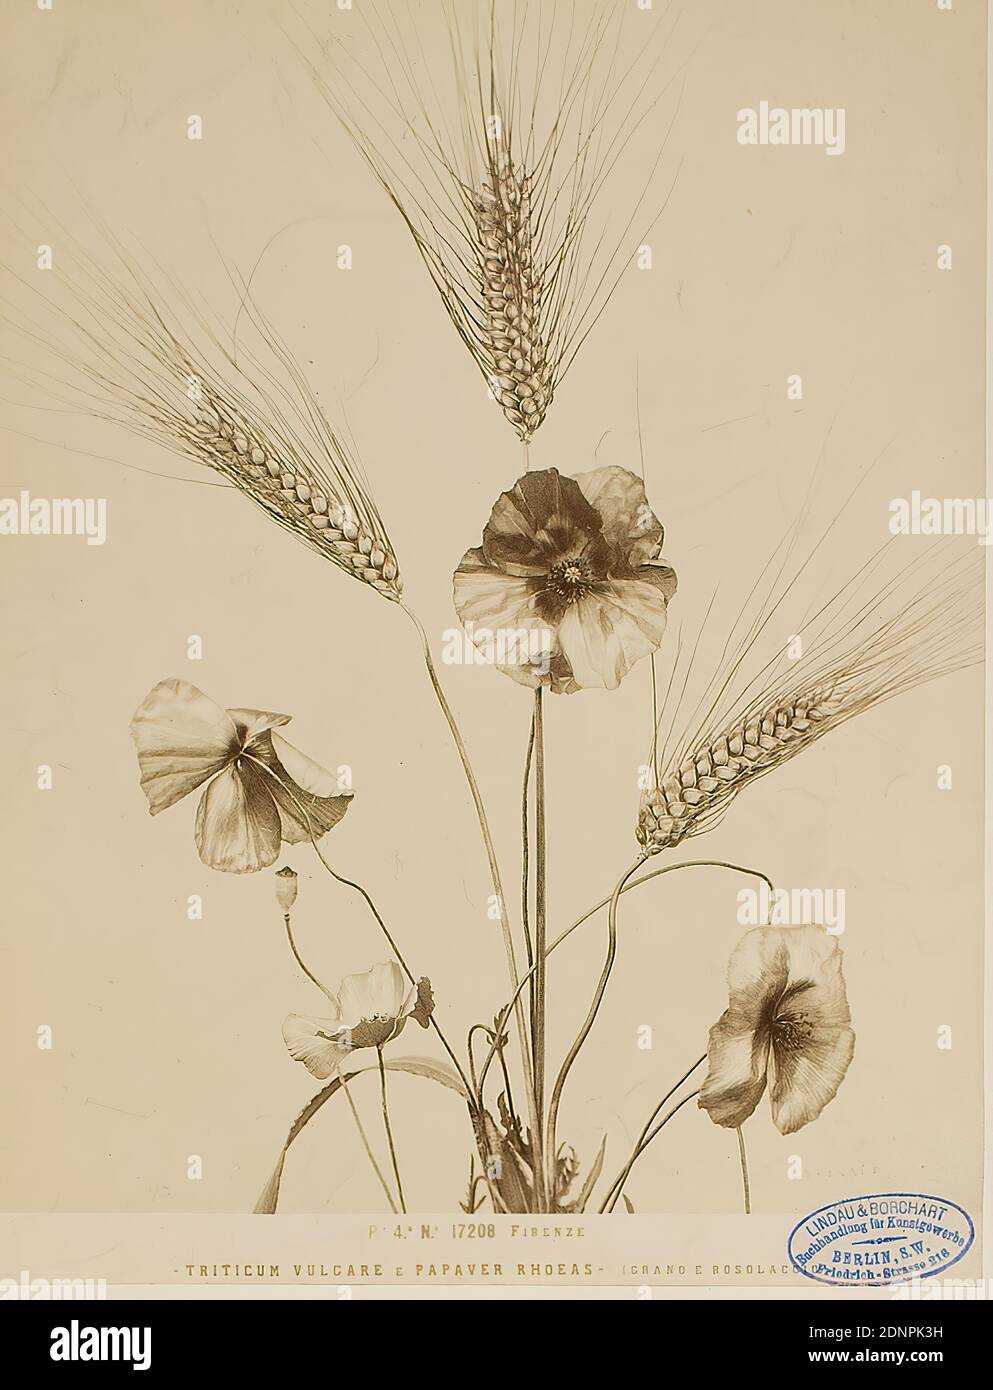 Firenze - Triticum vulgare e Papaver rhoes - (grano e rosolaccio), albumin paper, black and white positive process, image size: height: 25.10 cm; width: 19.30 cm, titled: recto u. center: copied in block letters: FIRENZE - TRITICUM VULGARE E PAPAVER RHOES - (GRANO E ROSOLACCIO), stamp: recto and right: in blue: Lindau & Borchart - Buchhandlung für Kunstgewerbe, Berlin S.W, Friedrich-Strasse 216, stamp: verso and center: photography, nature photography, poppy flower, grain, corn Stock Photo